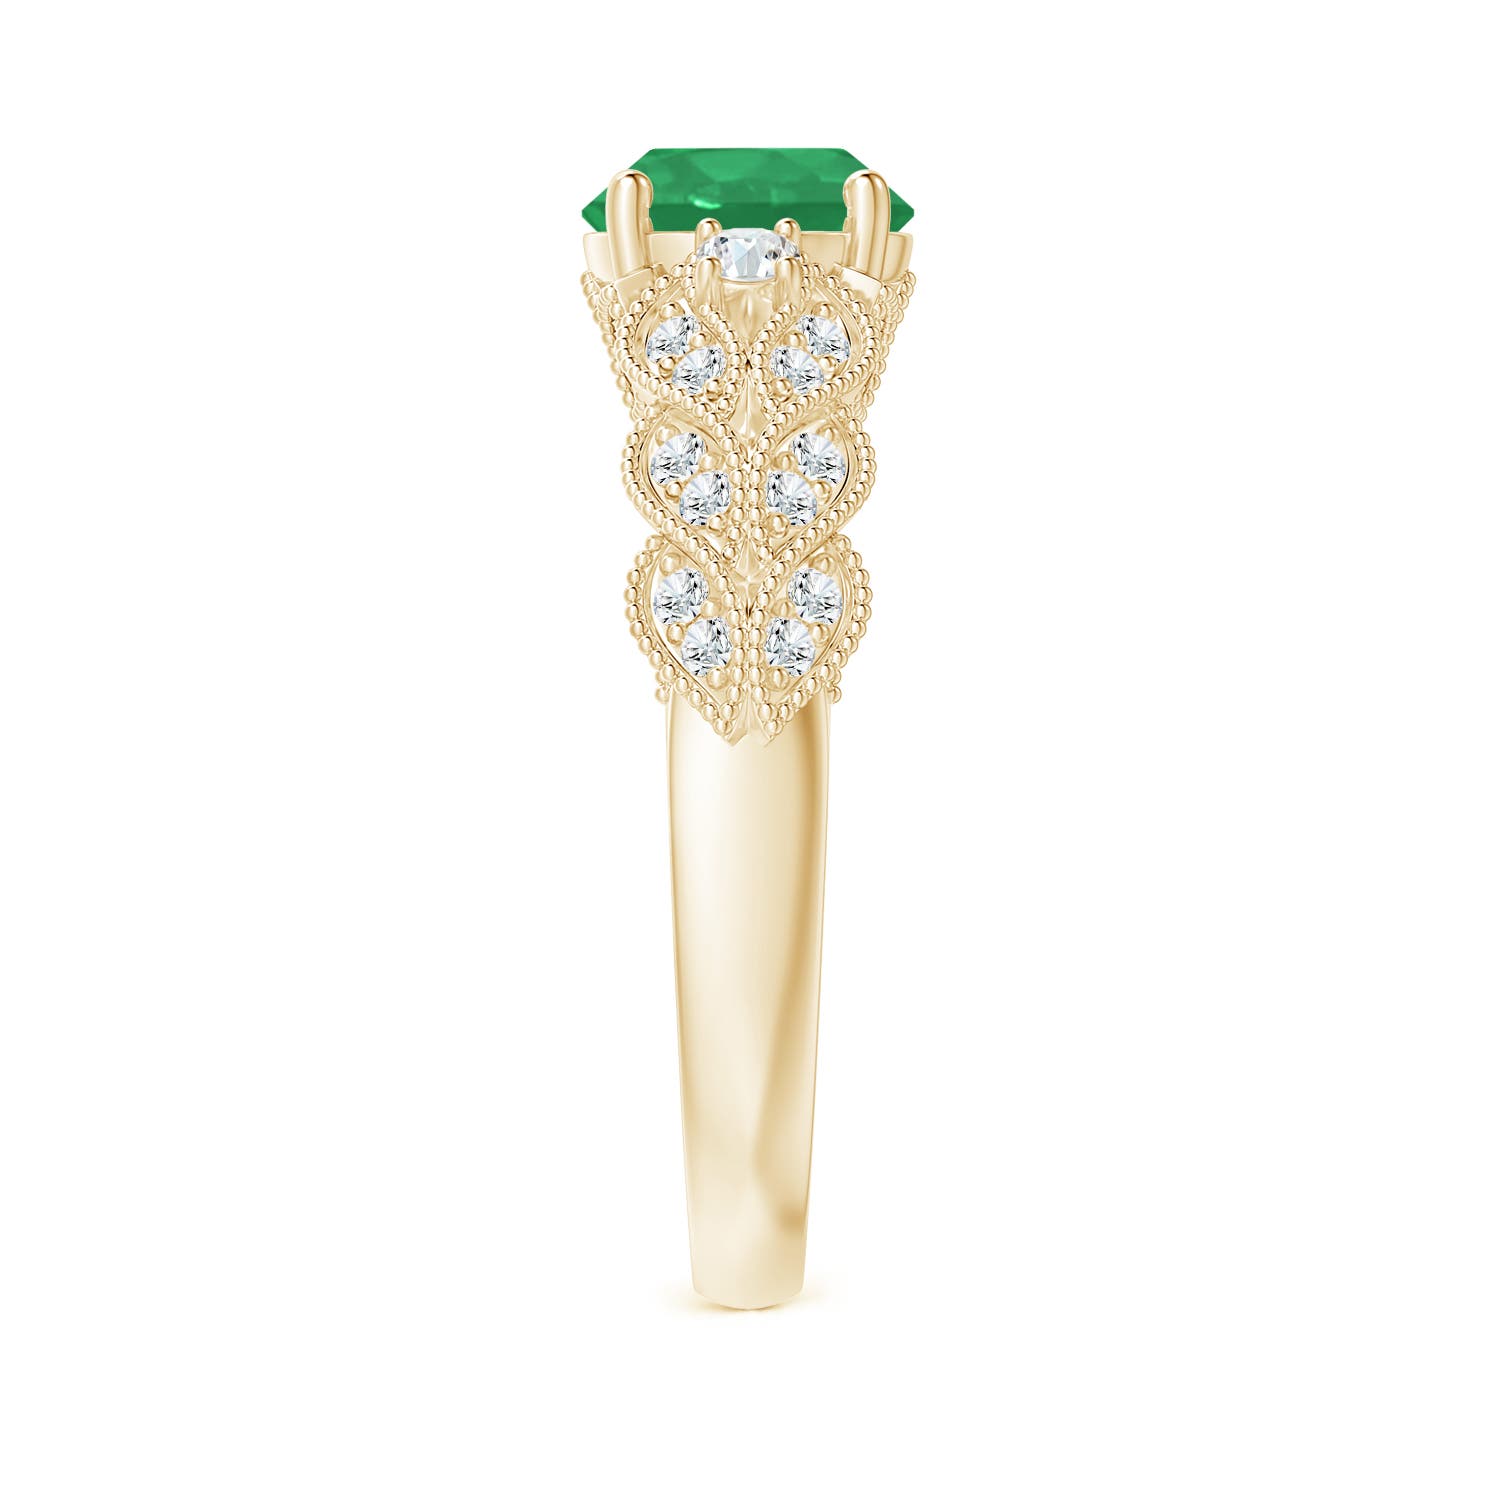 A - Emerald / 1.47 CT / 14 KT Yellow Gold